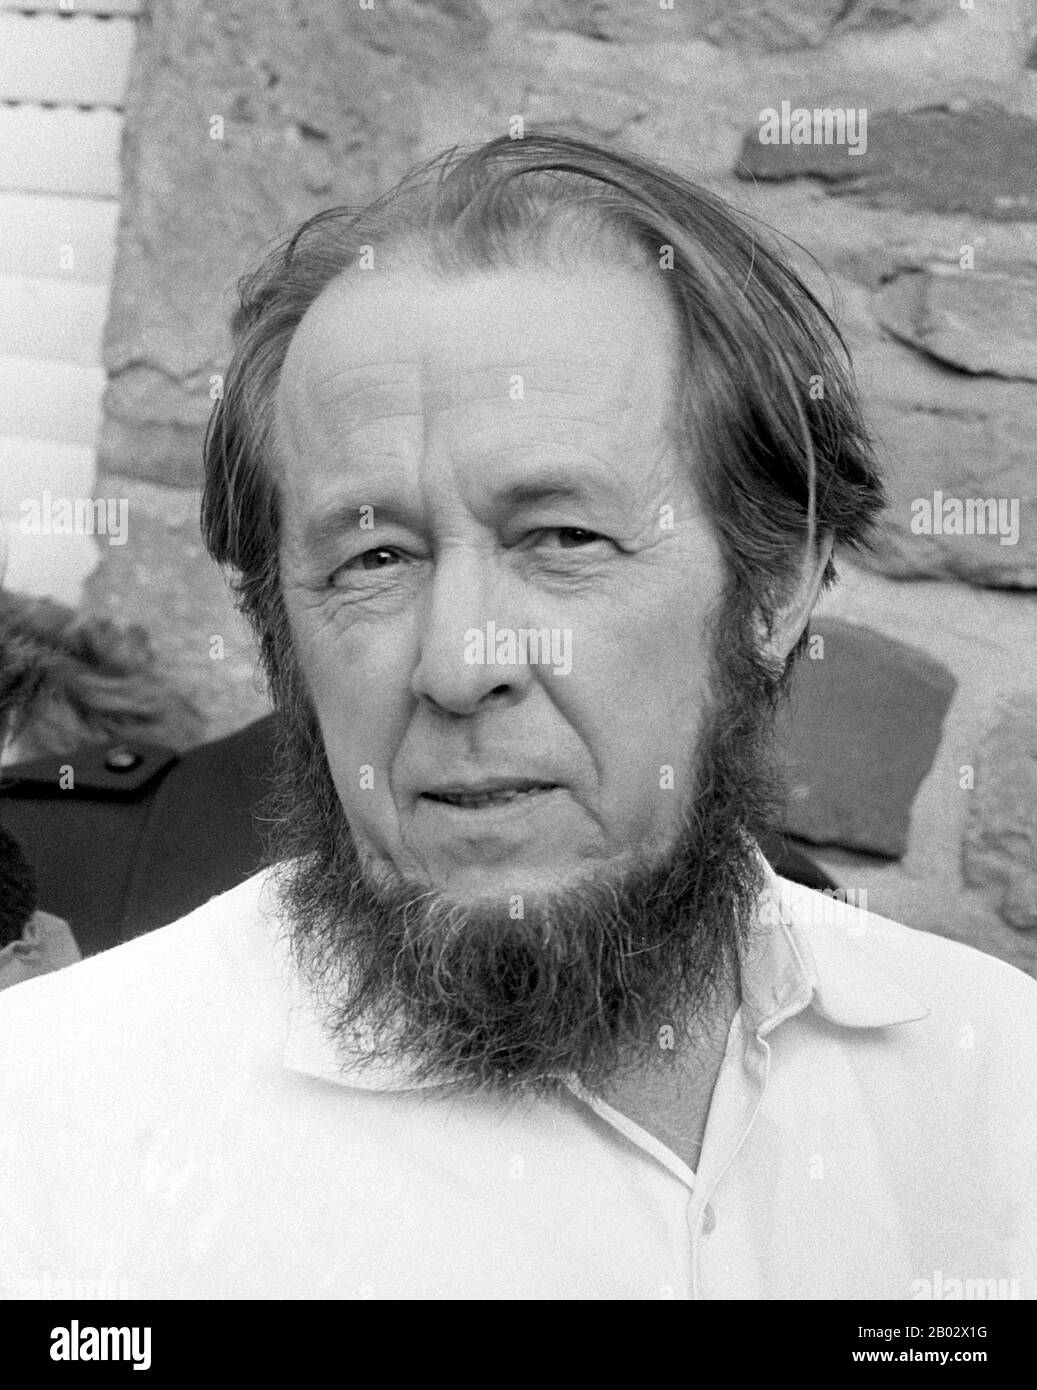 Aleksandr Isayevich Solzhenitsyn (11 December 1918 – 3 August 2008) was a Russian novelist, historian, and critic of Soviet totalitarianism. He helped to raise global awareness of the gulag and the Soviet Union's forced labor camp system.  While his writings were long suppressed in the USSR, he wrote many books, most notably The Gulag Archipelago, One Day in the Life of Ivan Denisovich, August 1914 and Cancer Ward. Solzhenitsyn was awarded the Nobel Prize in Literature in 1970 'for the ethical force with which he has pursued the indispensable traditions of Russian literature'. He was expelled Stock Photo